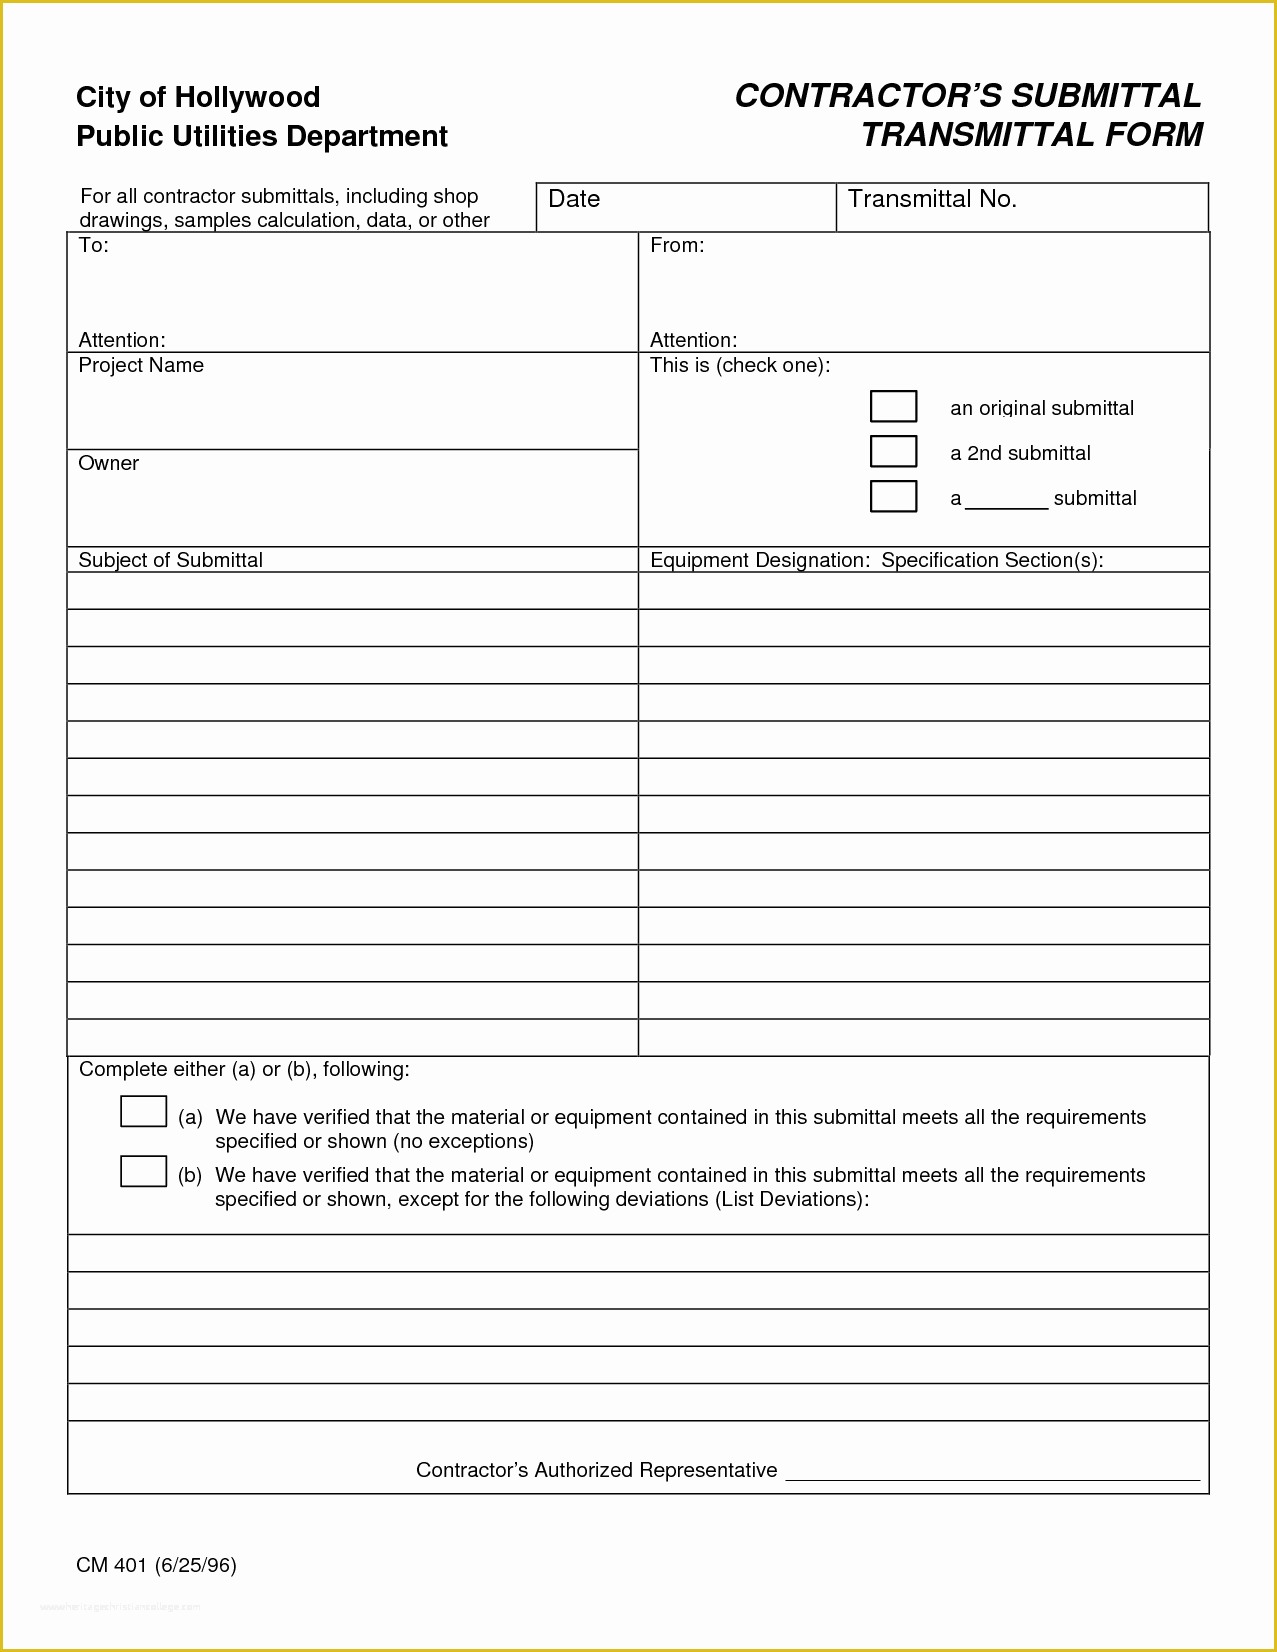 Free Construction Submittal form Template Of Transmittal Template Bamboodownunder